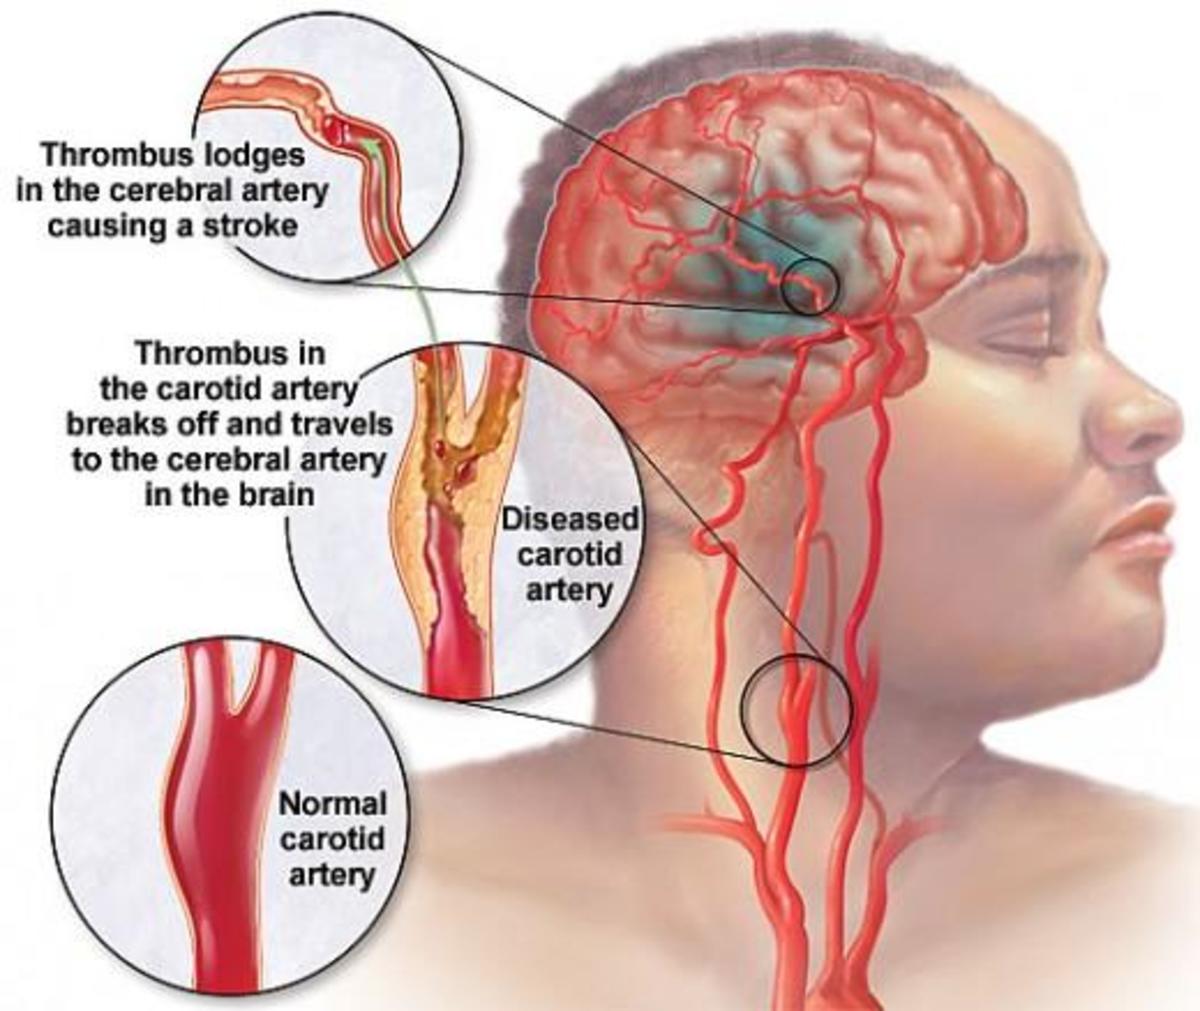 Chelation Therapy Cures Stroke (Blood Clot) - More ...